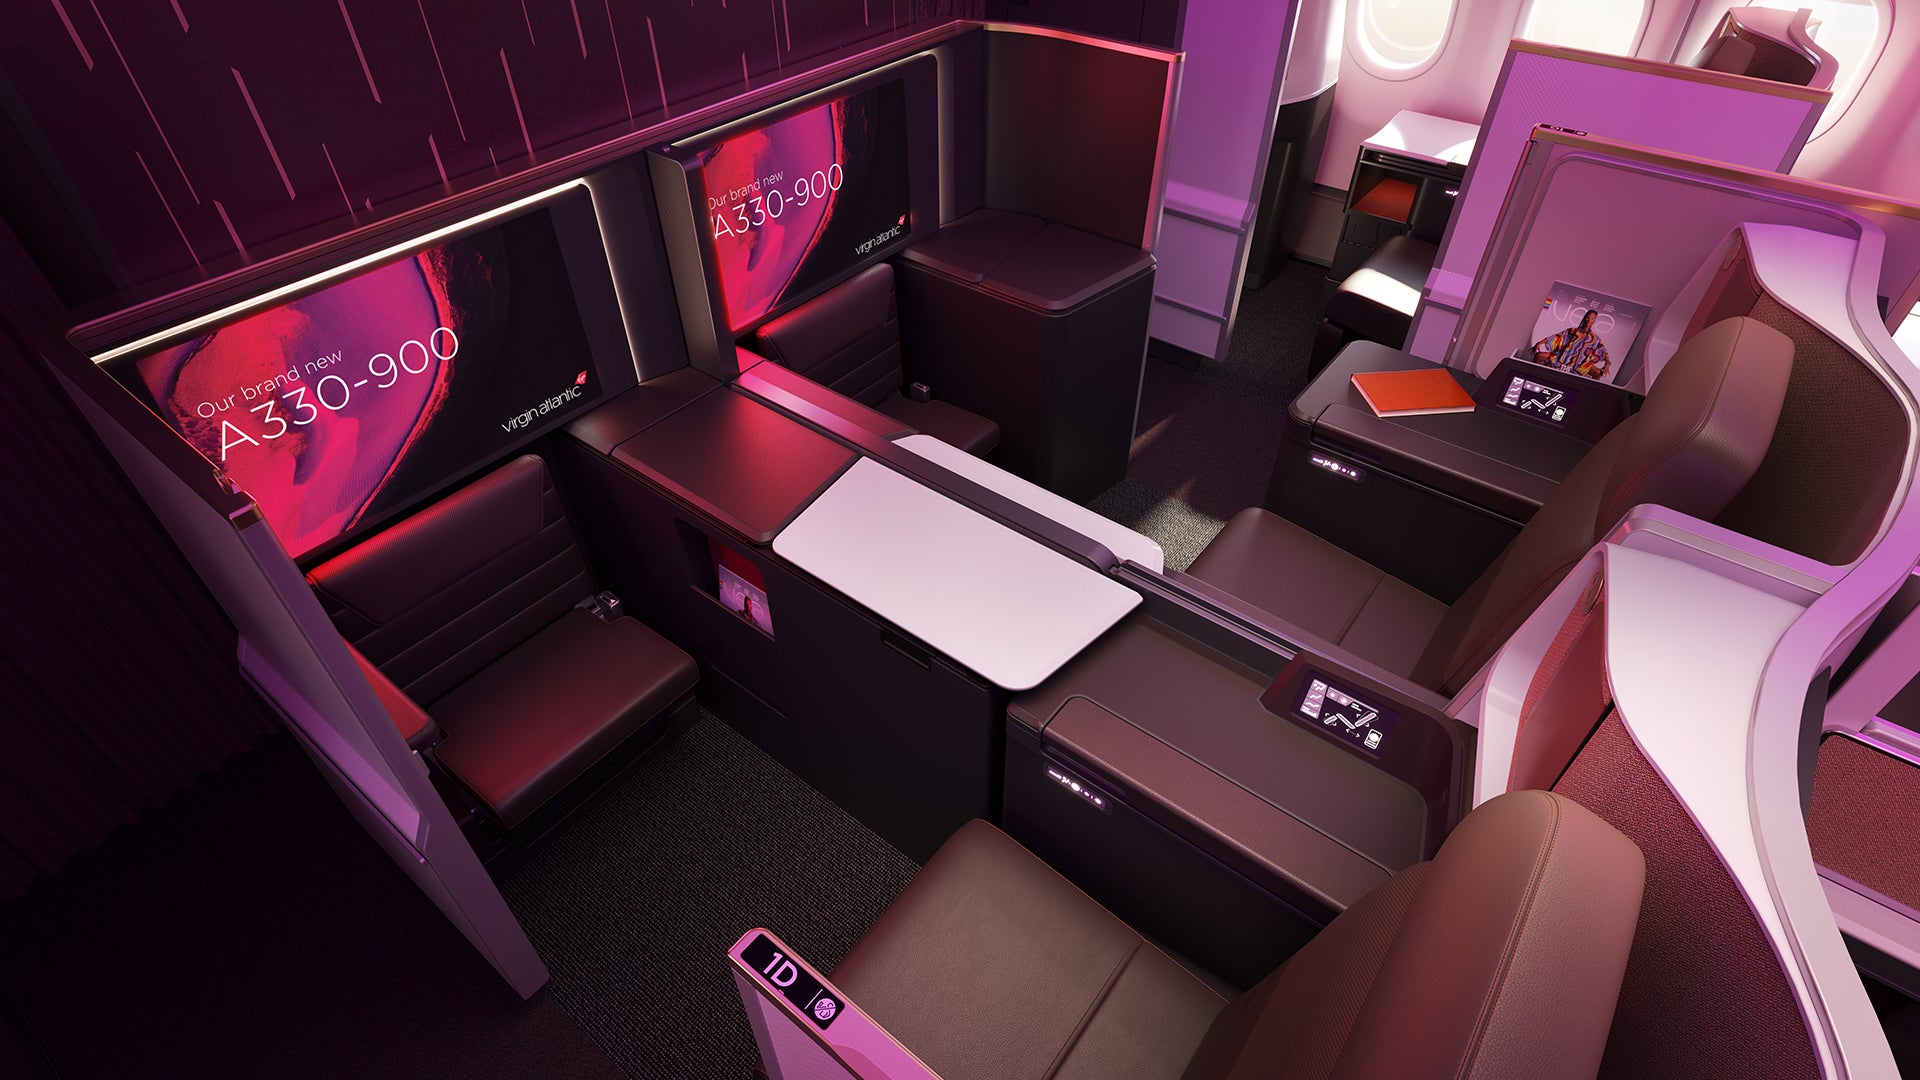 The Retreat suite on Virgin’s A330neo aircraft